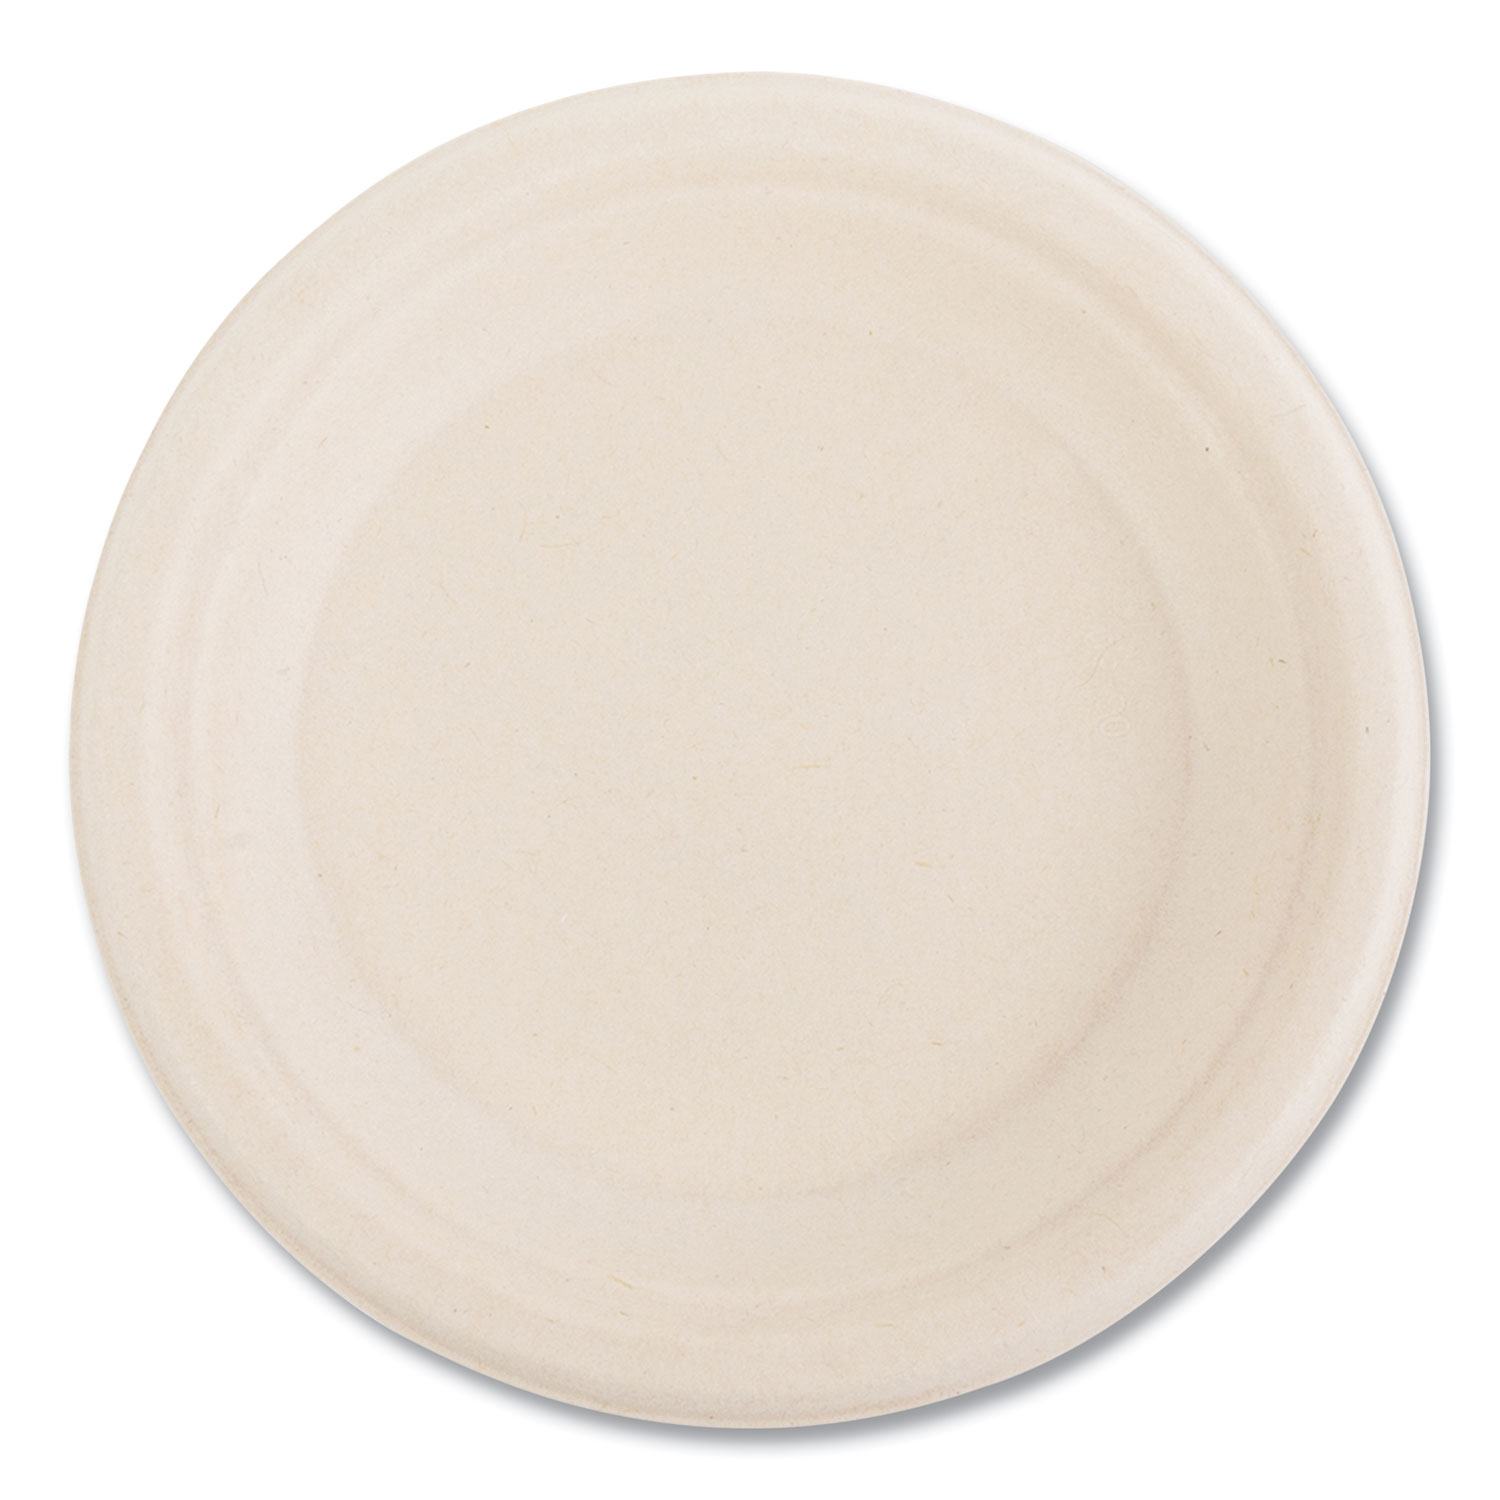 10 Bagasse 3-Compartment Round Plate - 500 ct